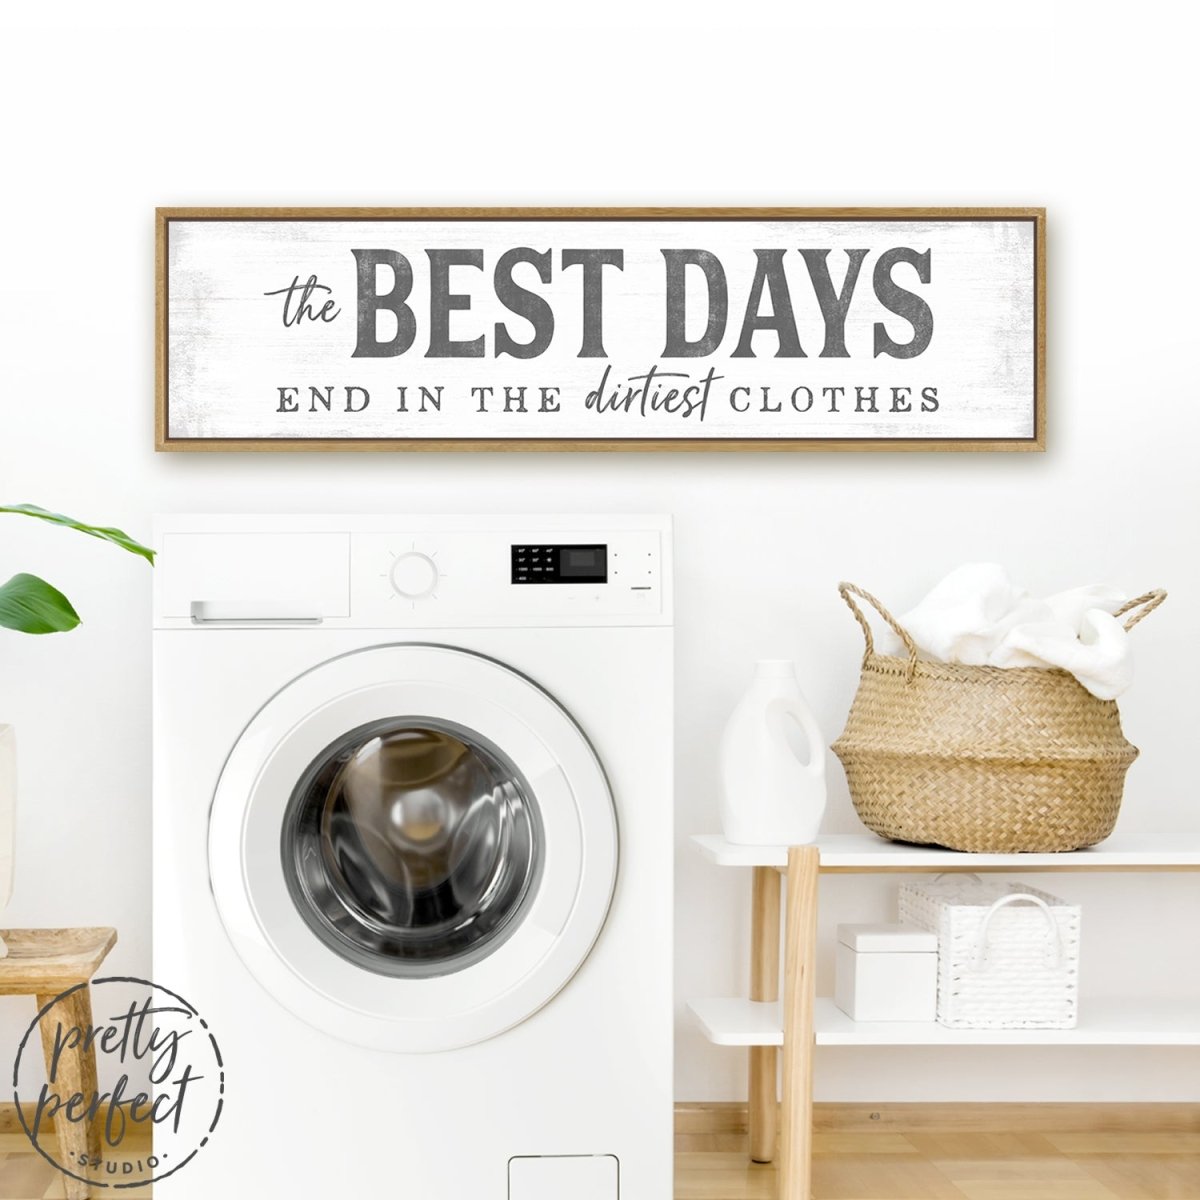 The Best Days End in the Dirtiest Clothes Sign Above Dryer in Laundry Room - Pretty Perfect Studio